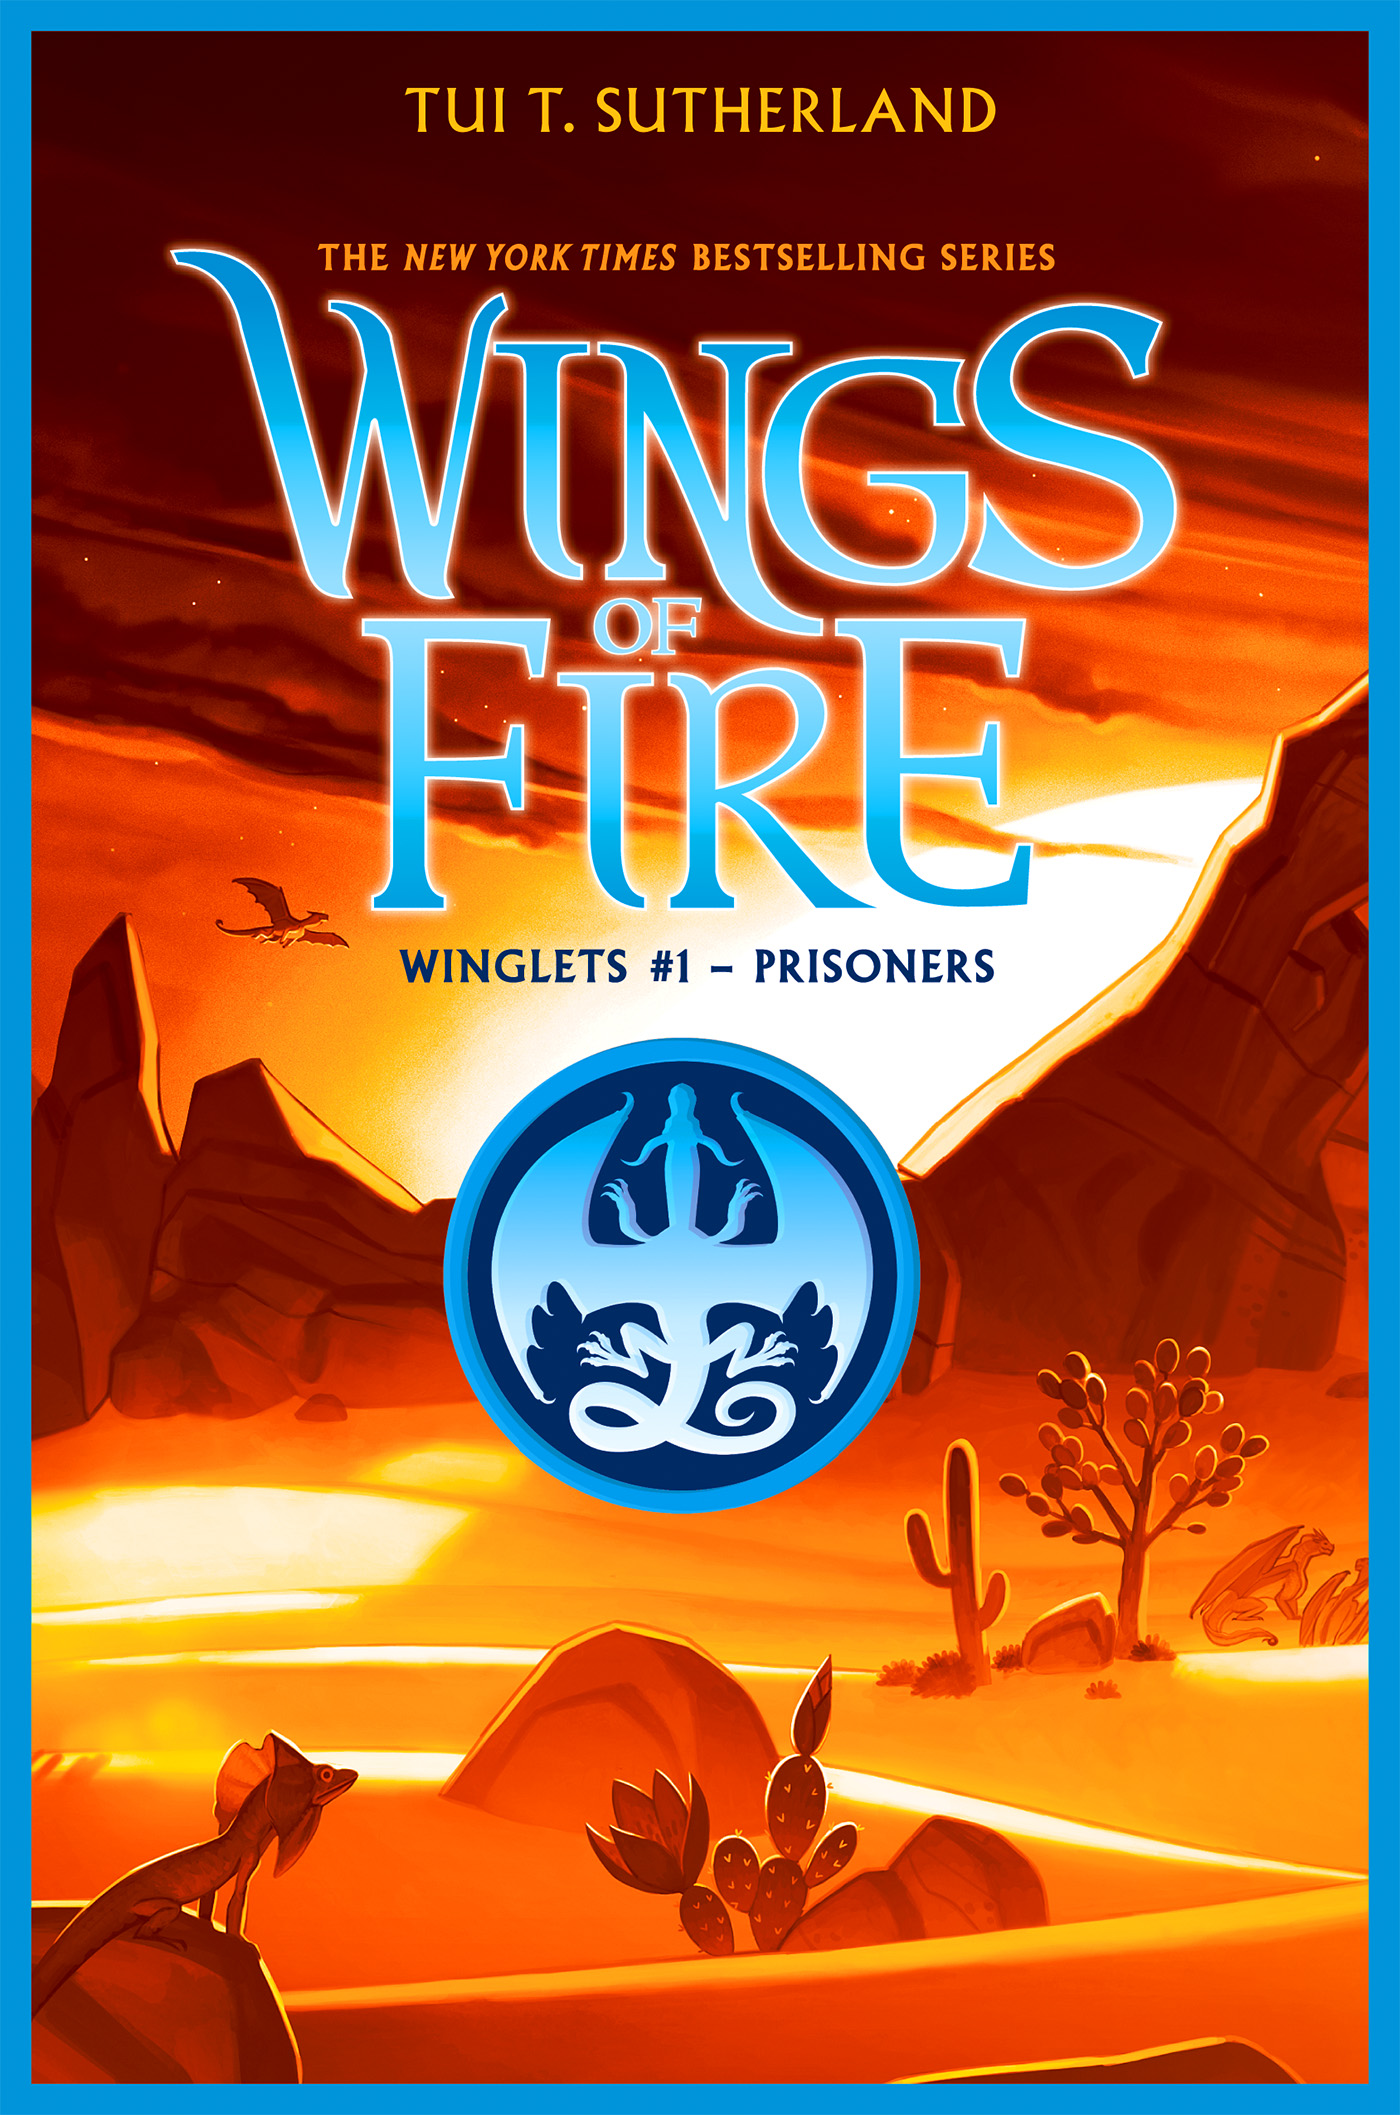 brief story of wings of fire